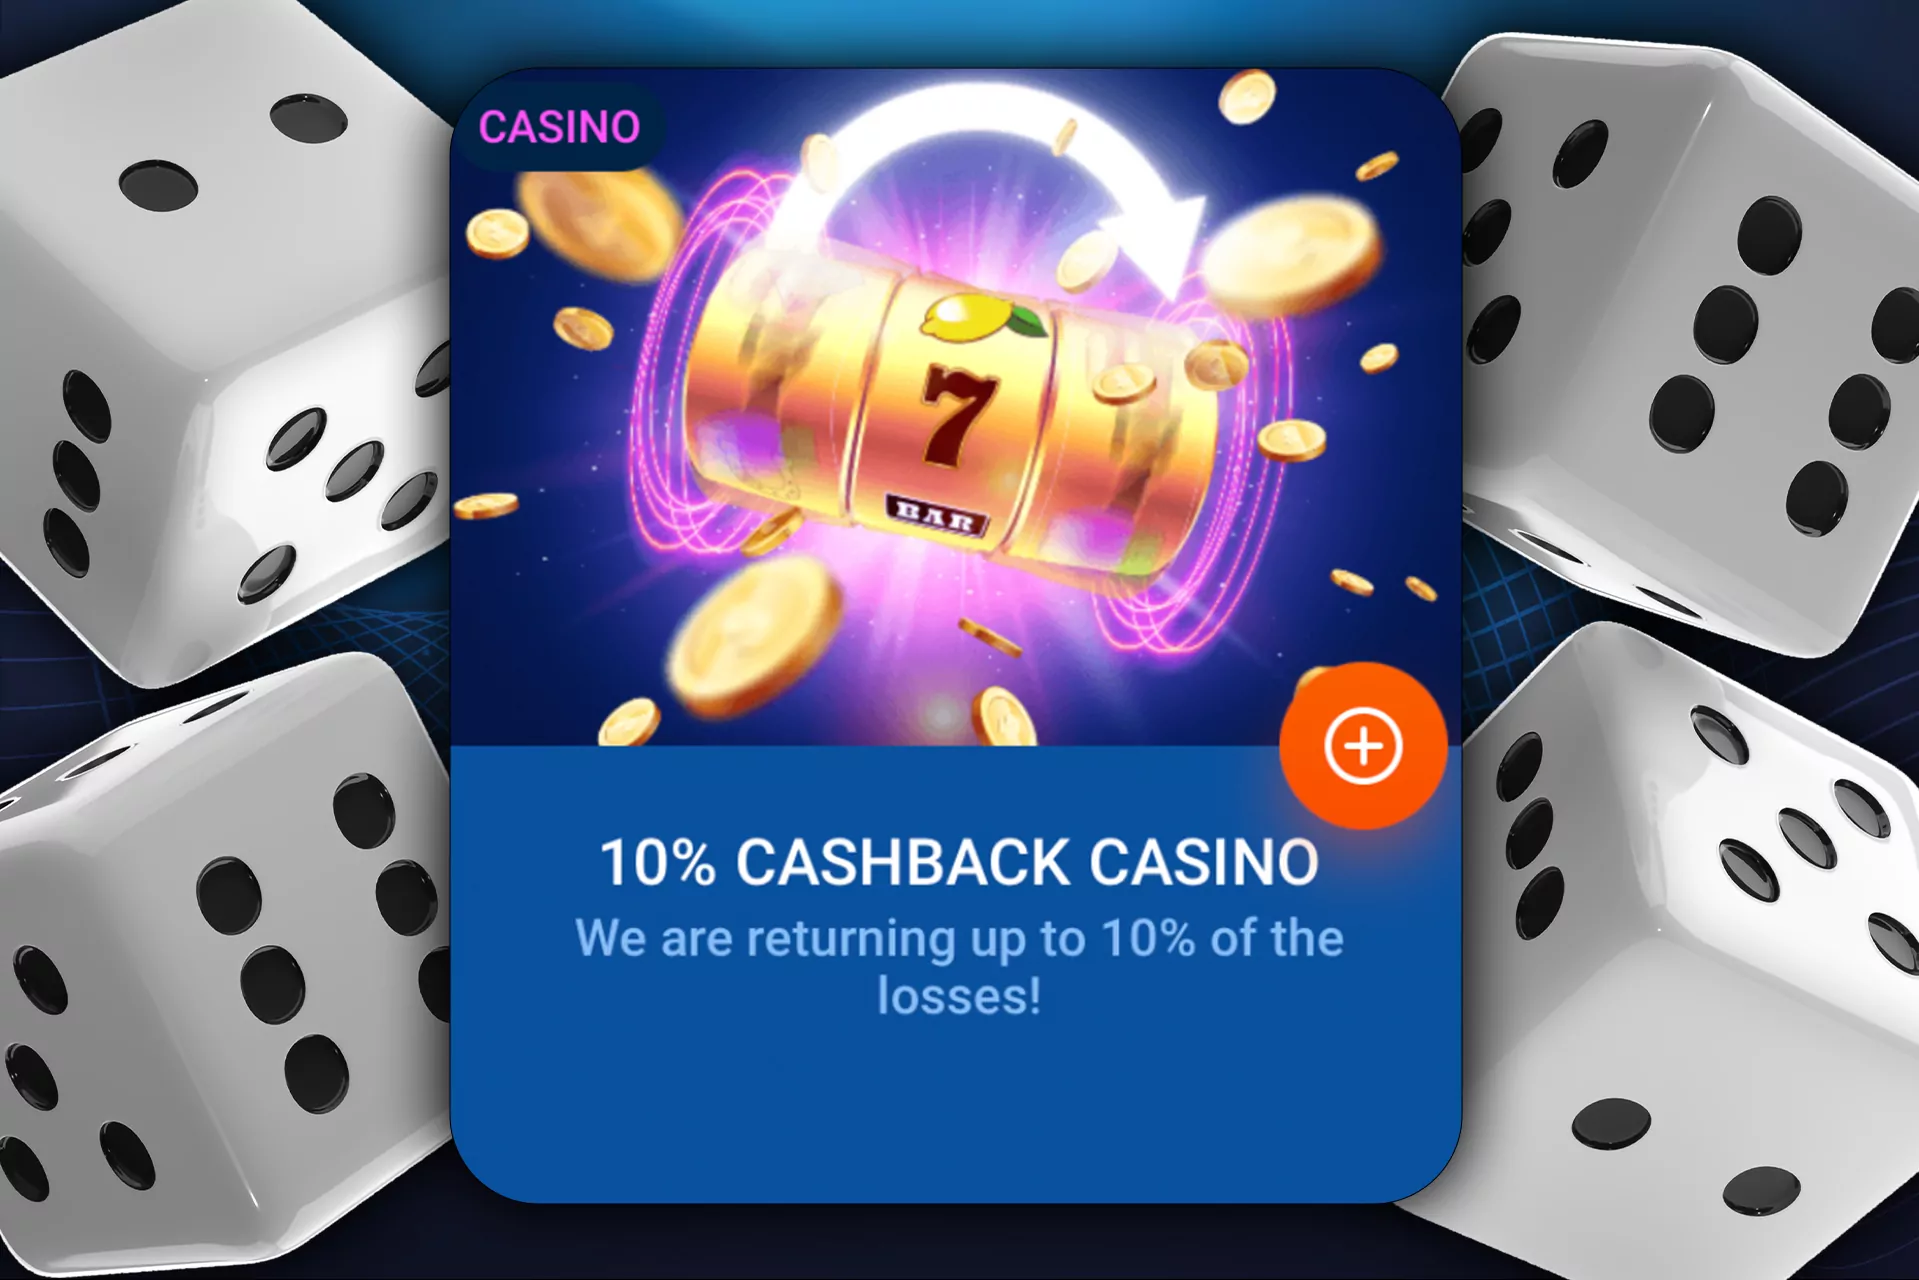 For players from India 10% cashback is available, we return up to 10% of losses.